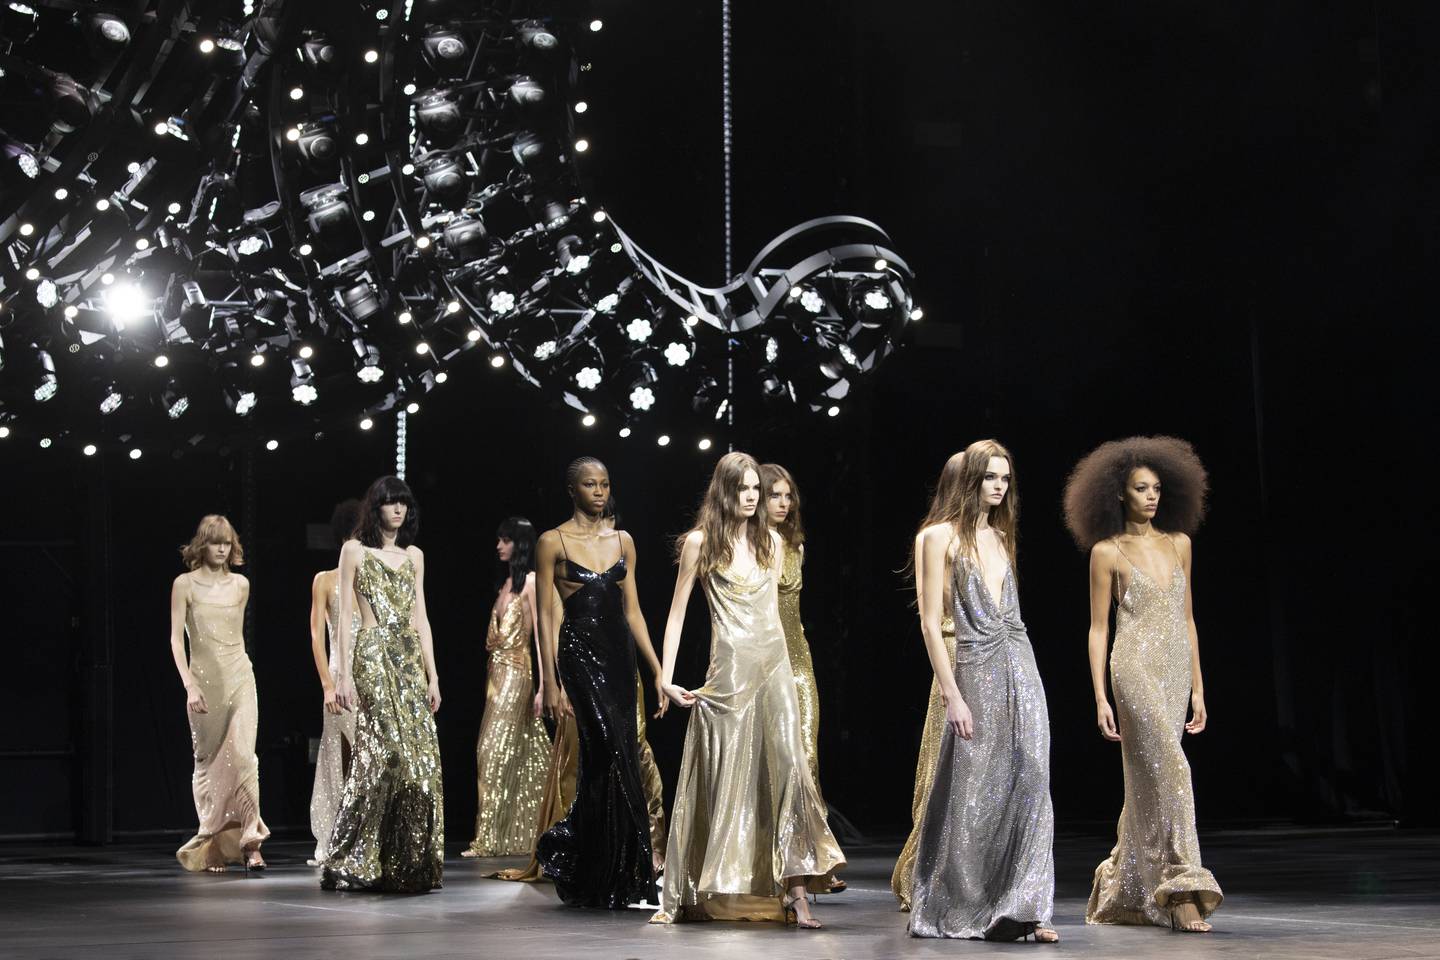 The finale of the Celine Winter 2023 show, "The Age of Indieness," which took place on December 8, 2022, at the Wiltern Theatre in Los Angeles, California.